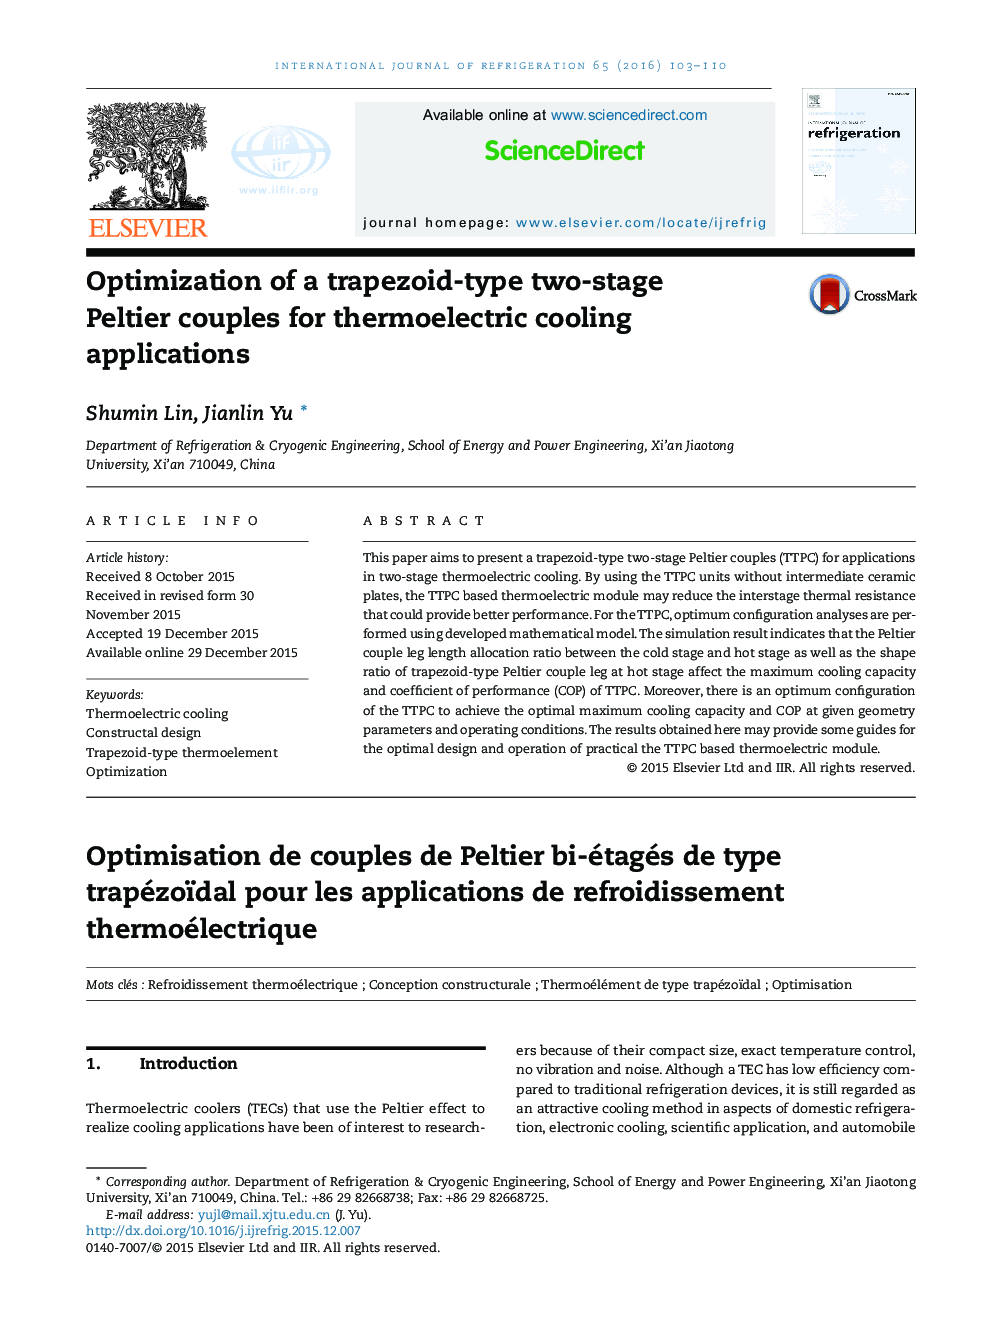 Optimization of a trapezoid-type two-stage Peltier couples for thermoelectric cooling applications